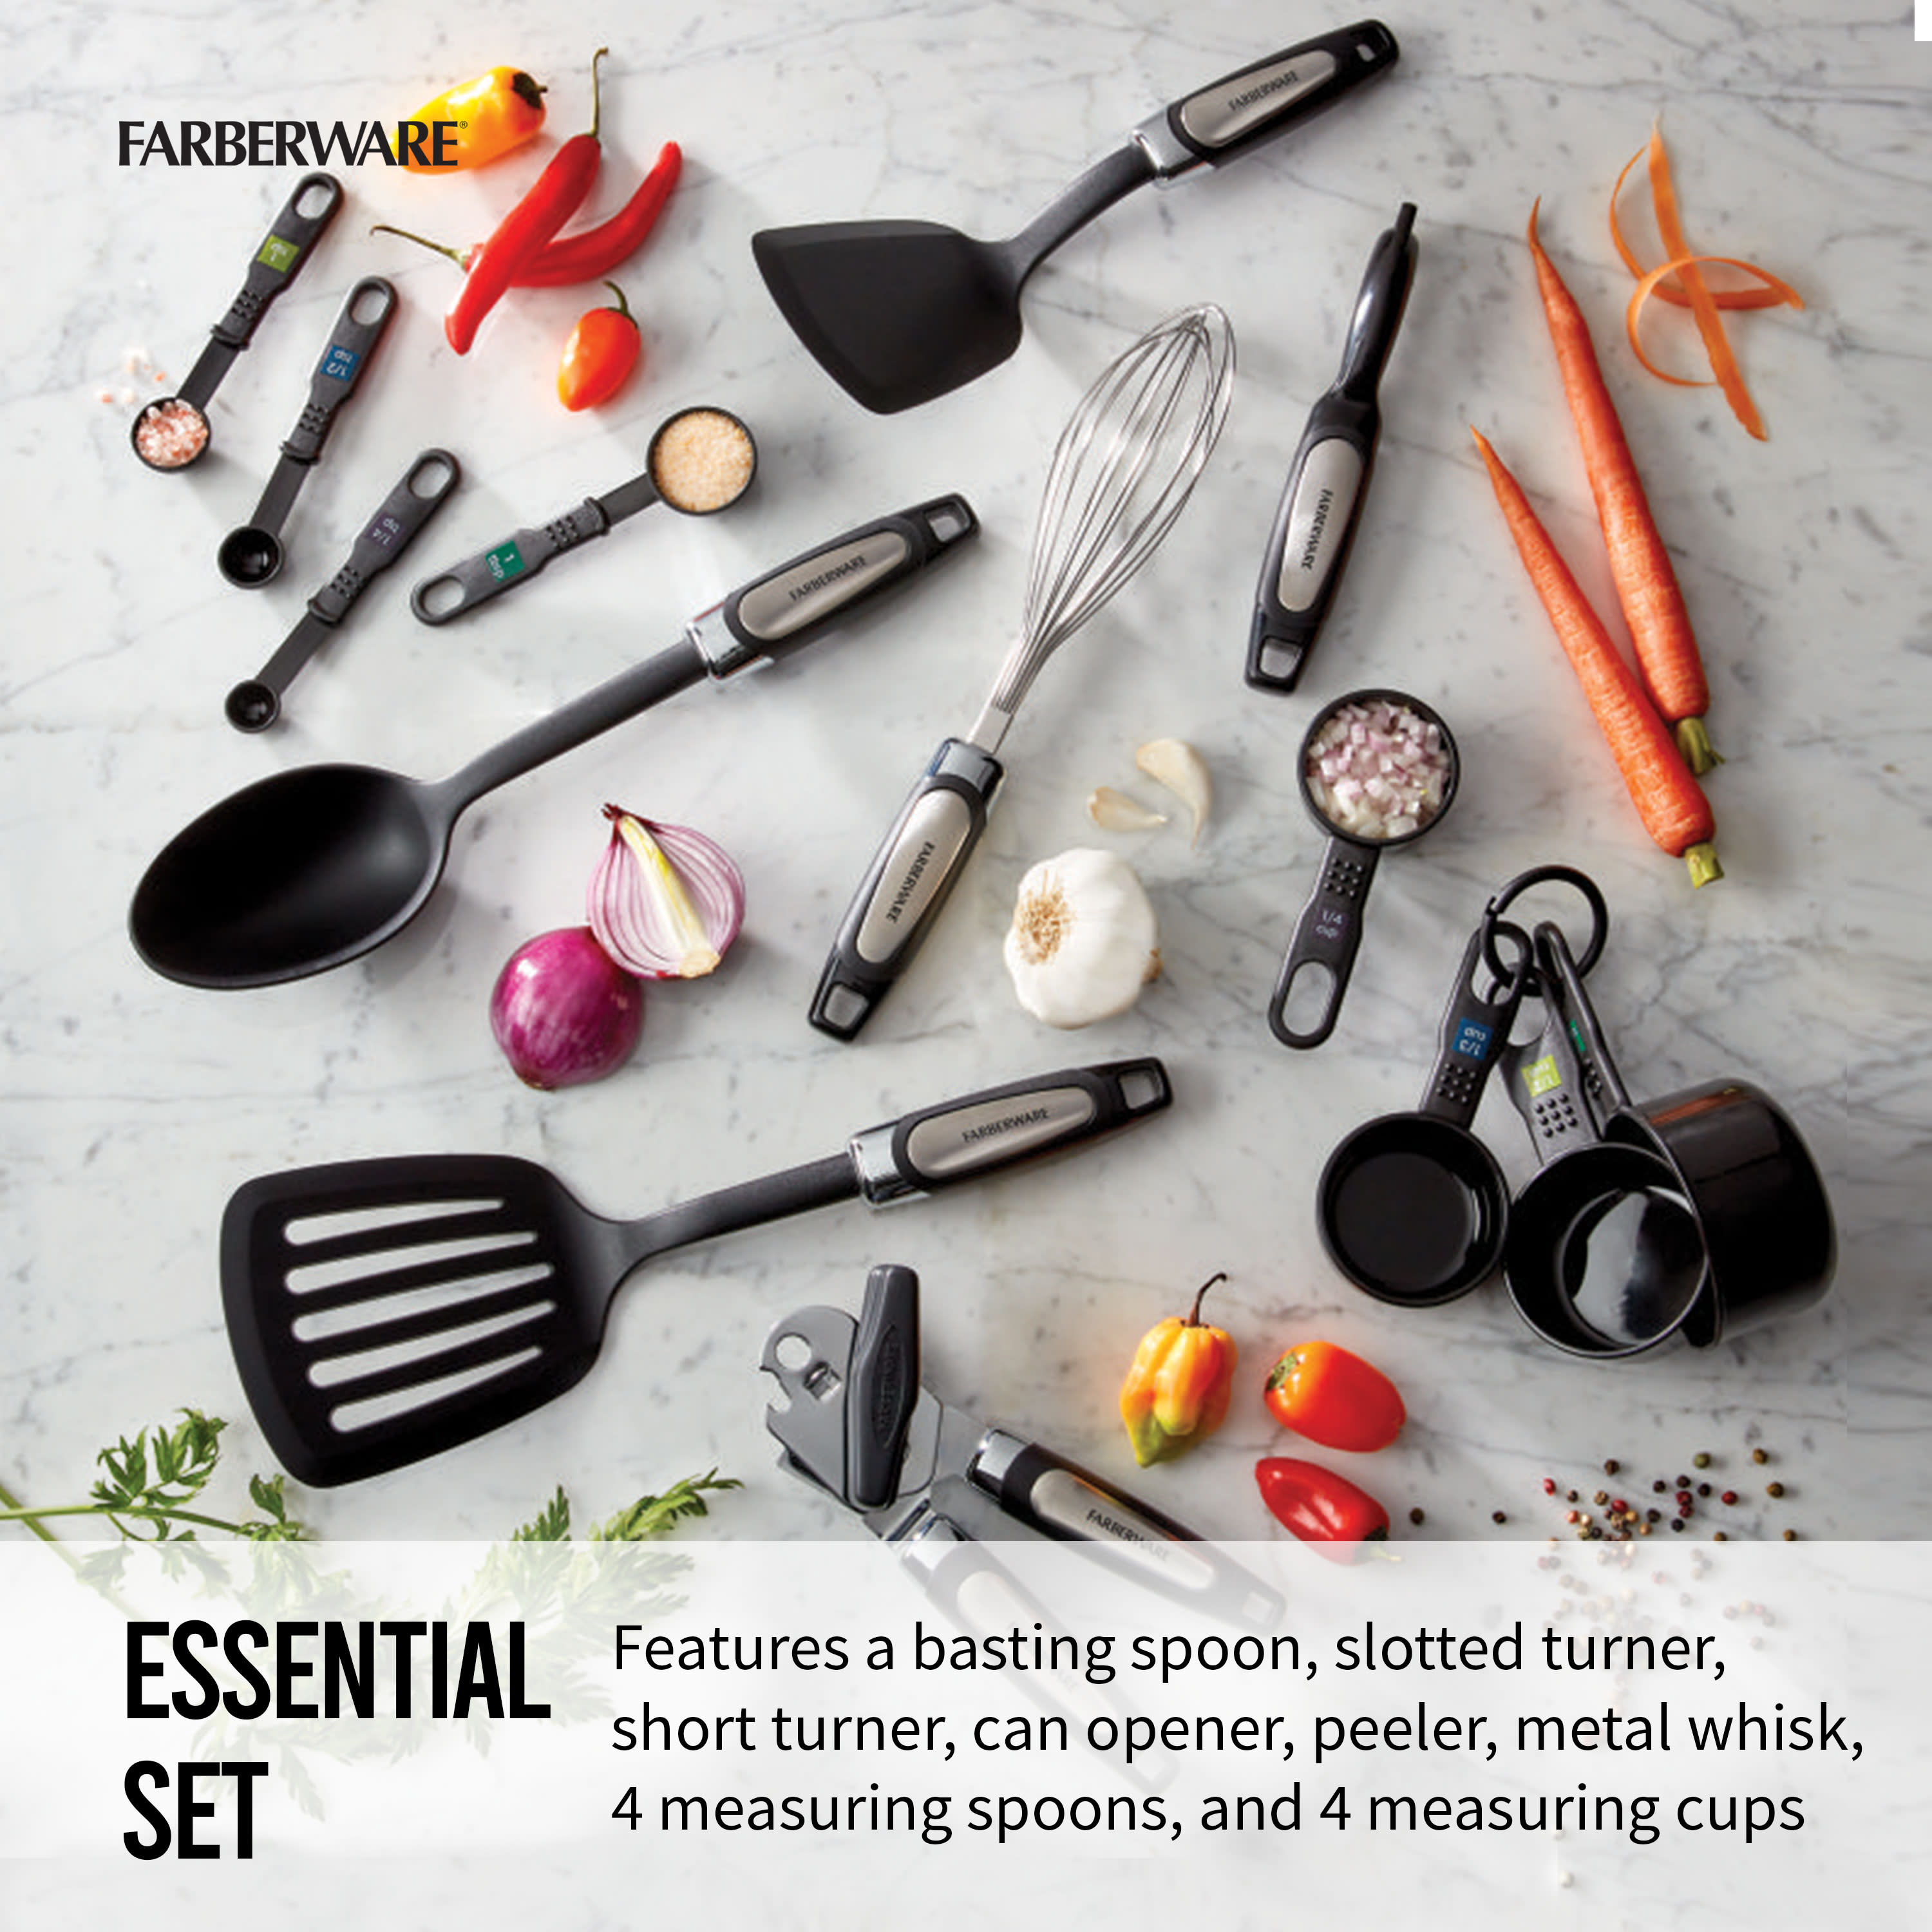 Farberware Professional 14-piece Kitchen Tool and Gadget Set in Black - image 3 of 19